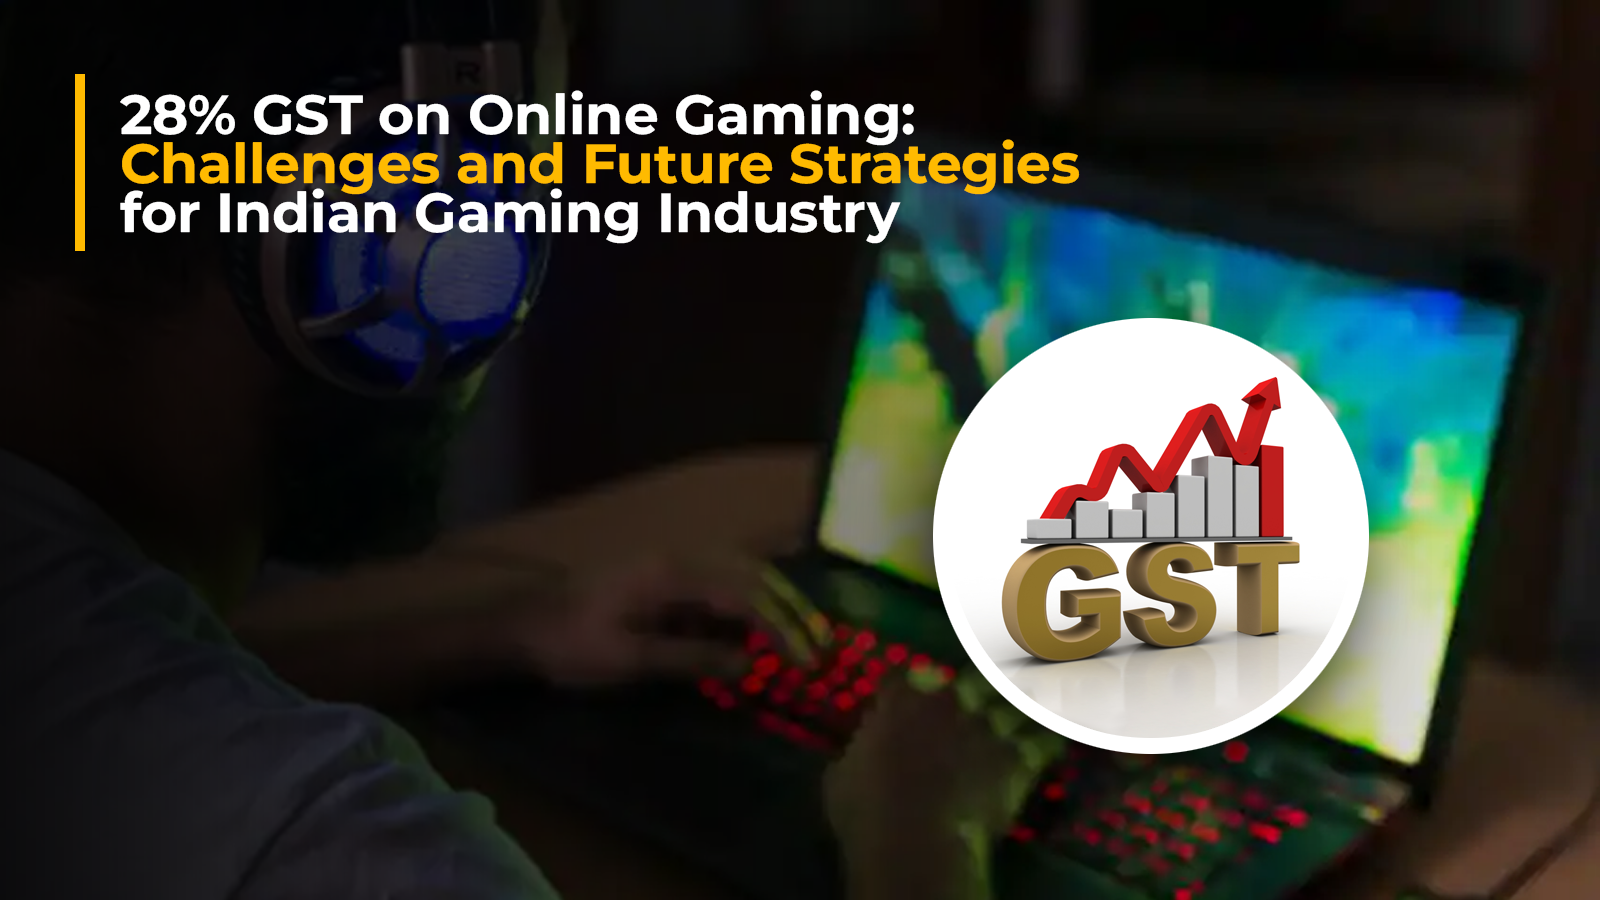 28% GST on Online Gaming: Challenges and Future Strategies for Indian Gaming Industry